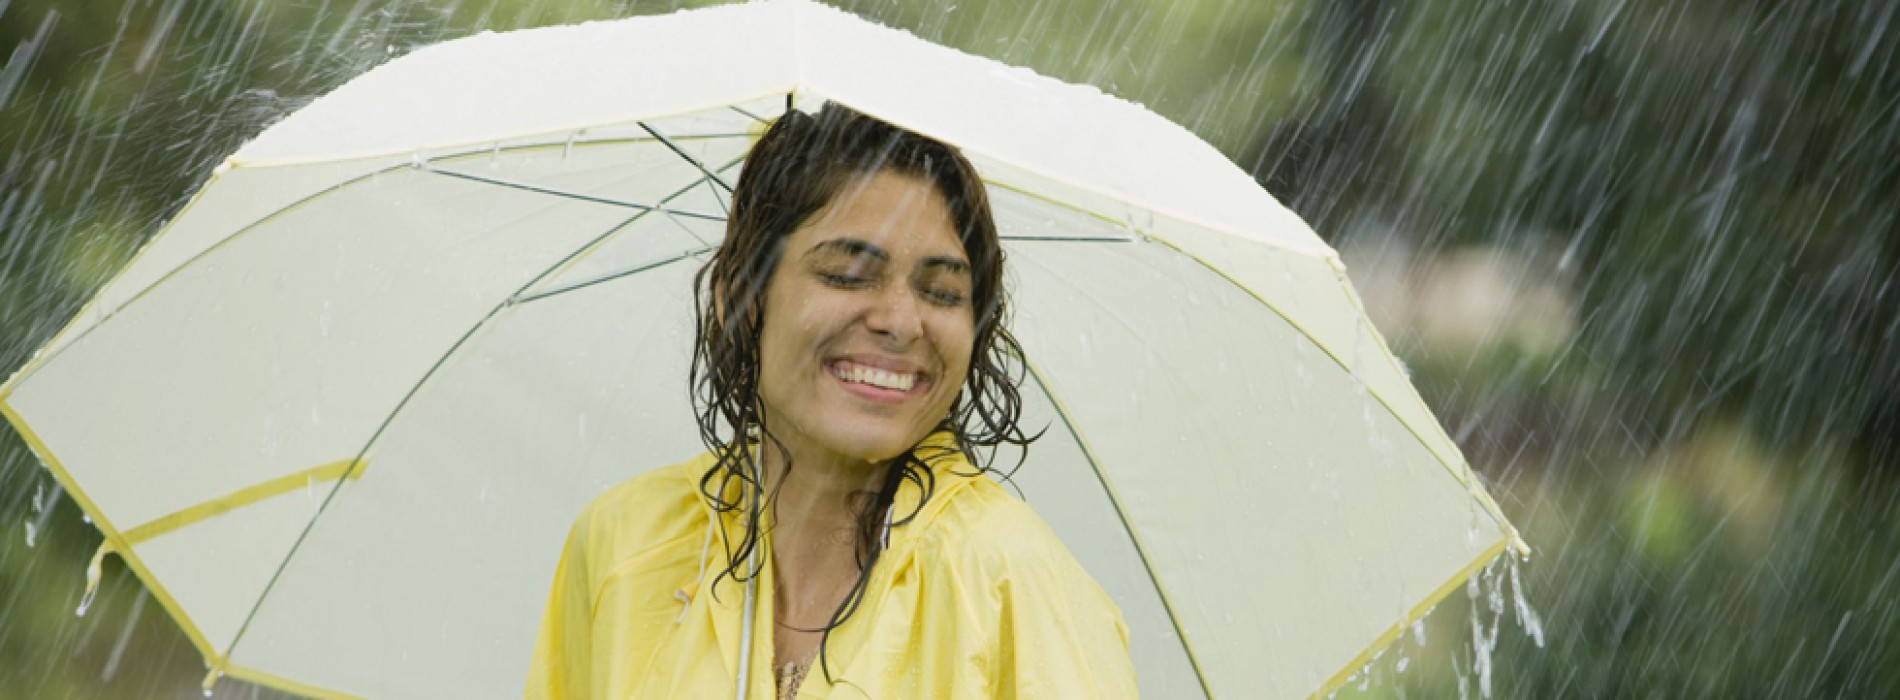 Smart Tips For Your Monsoon Travel Plans